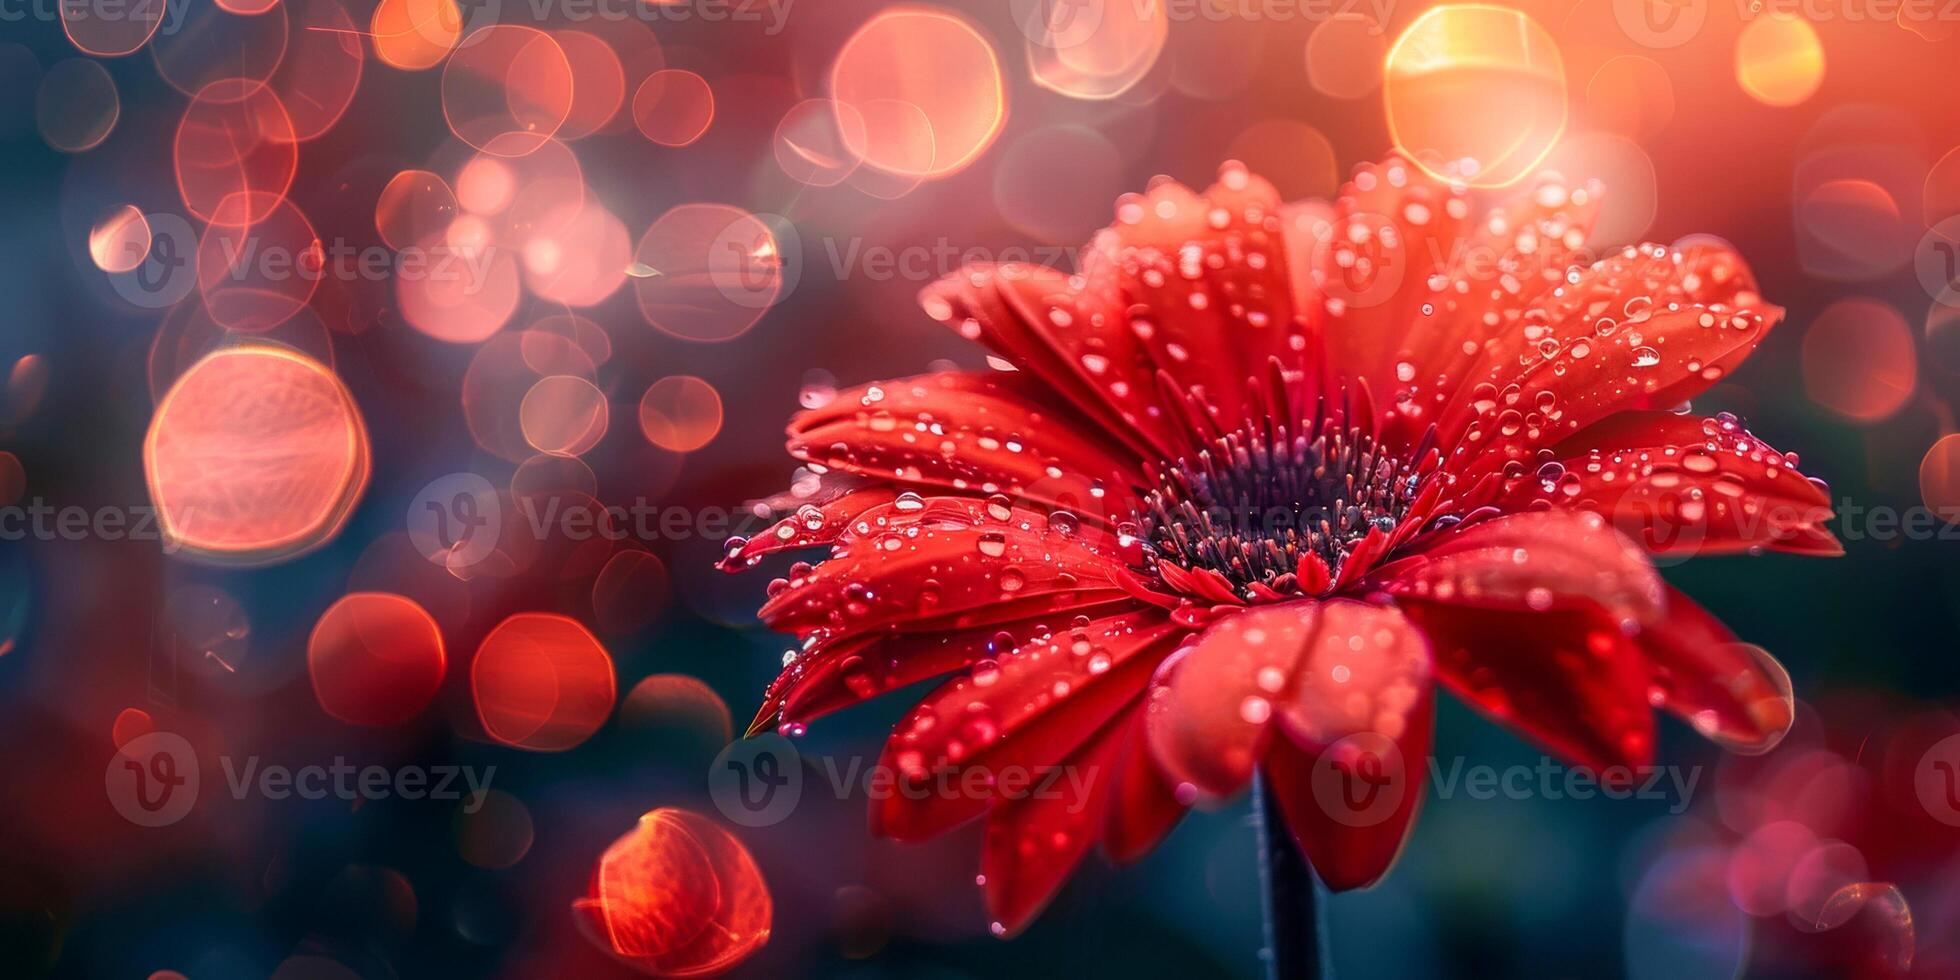 Scarlet Gerbera Daisy with Water Droplets and Glistening Bokeh photo